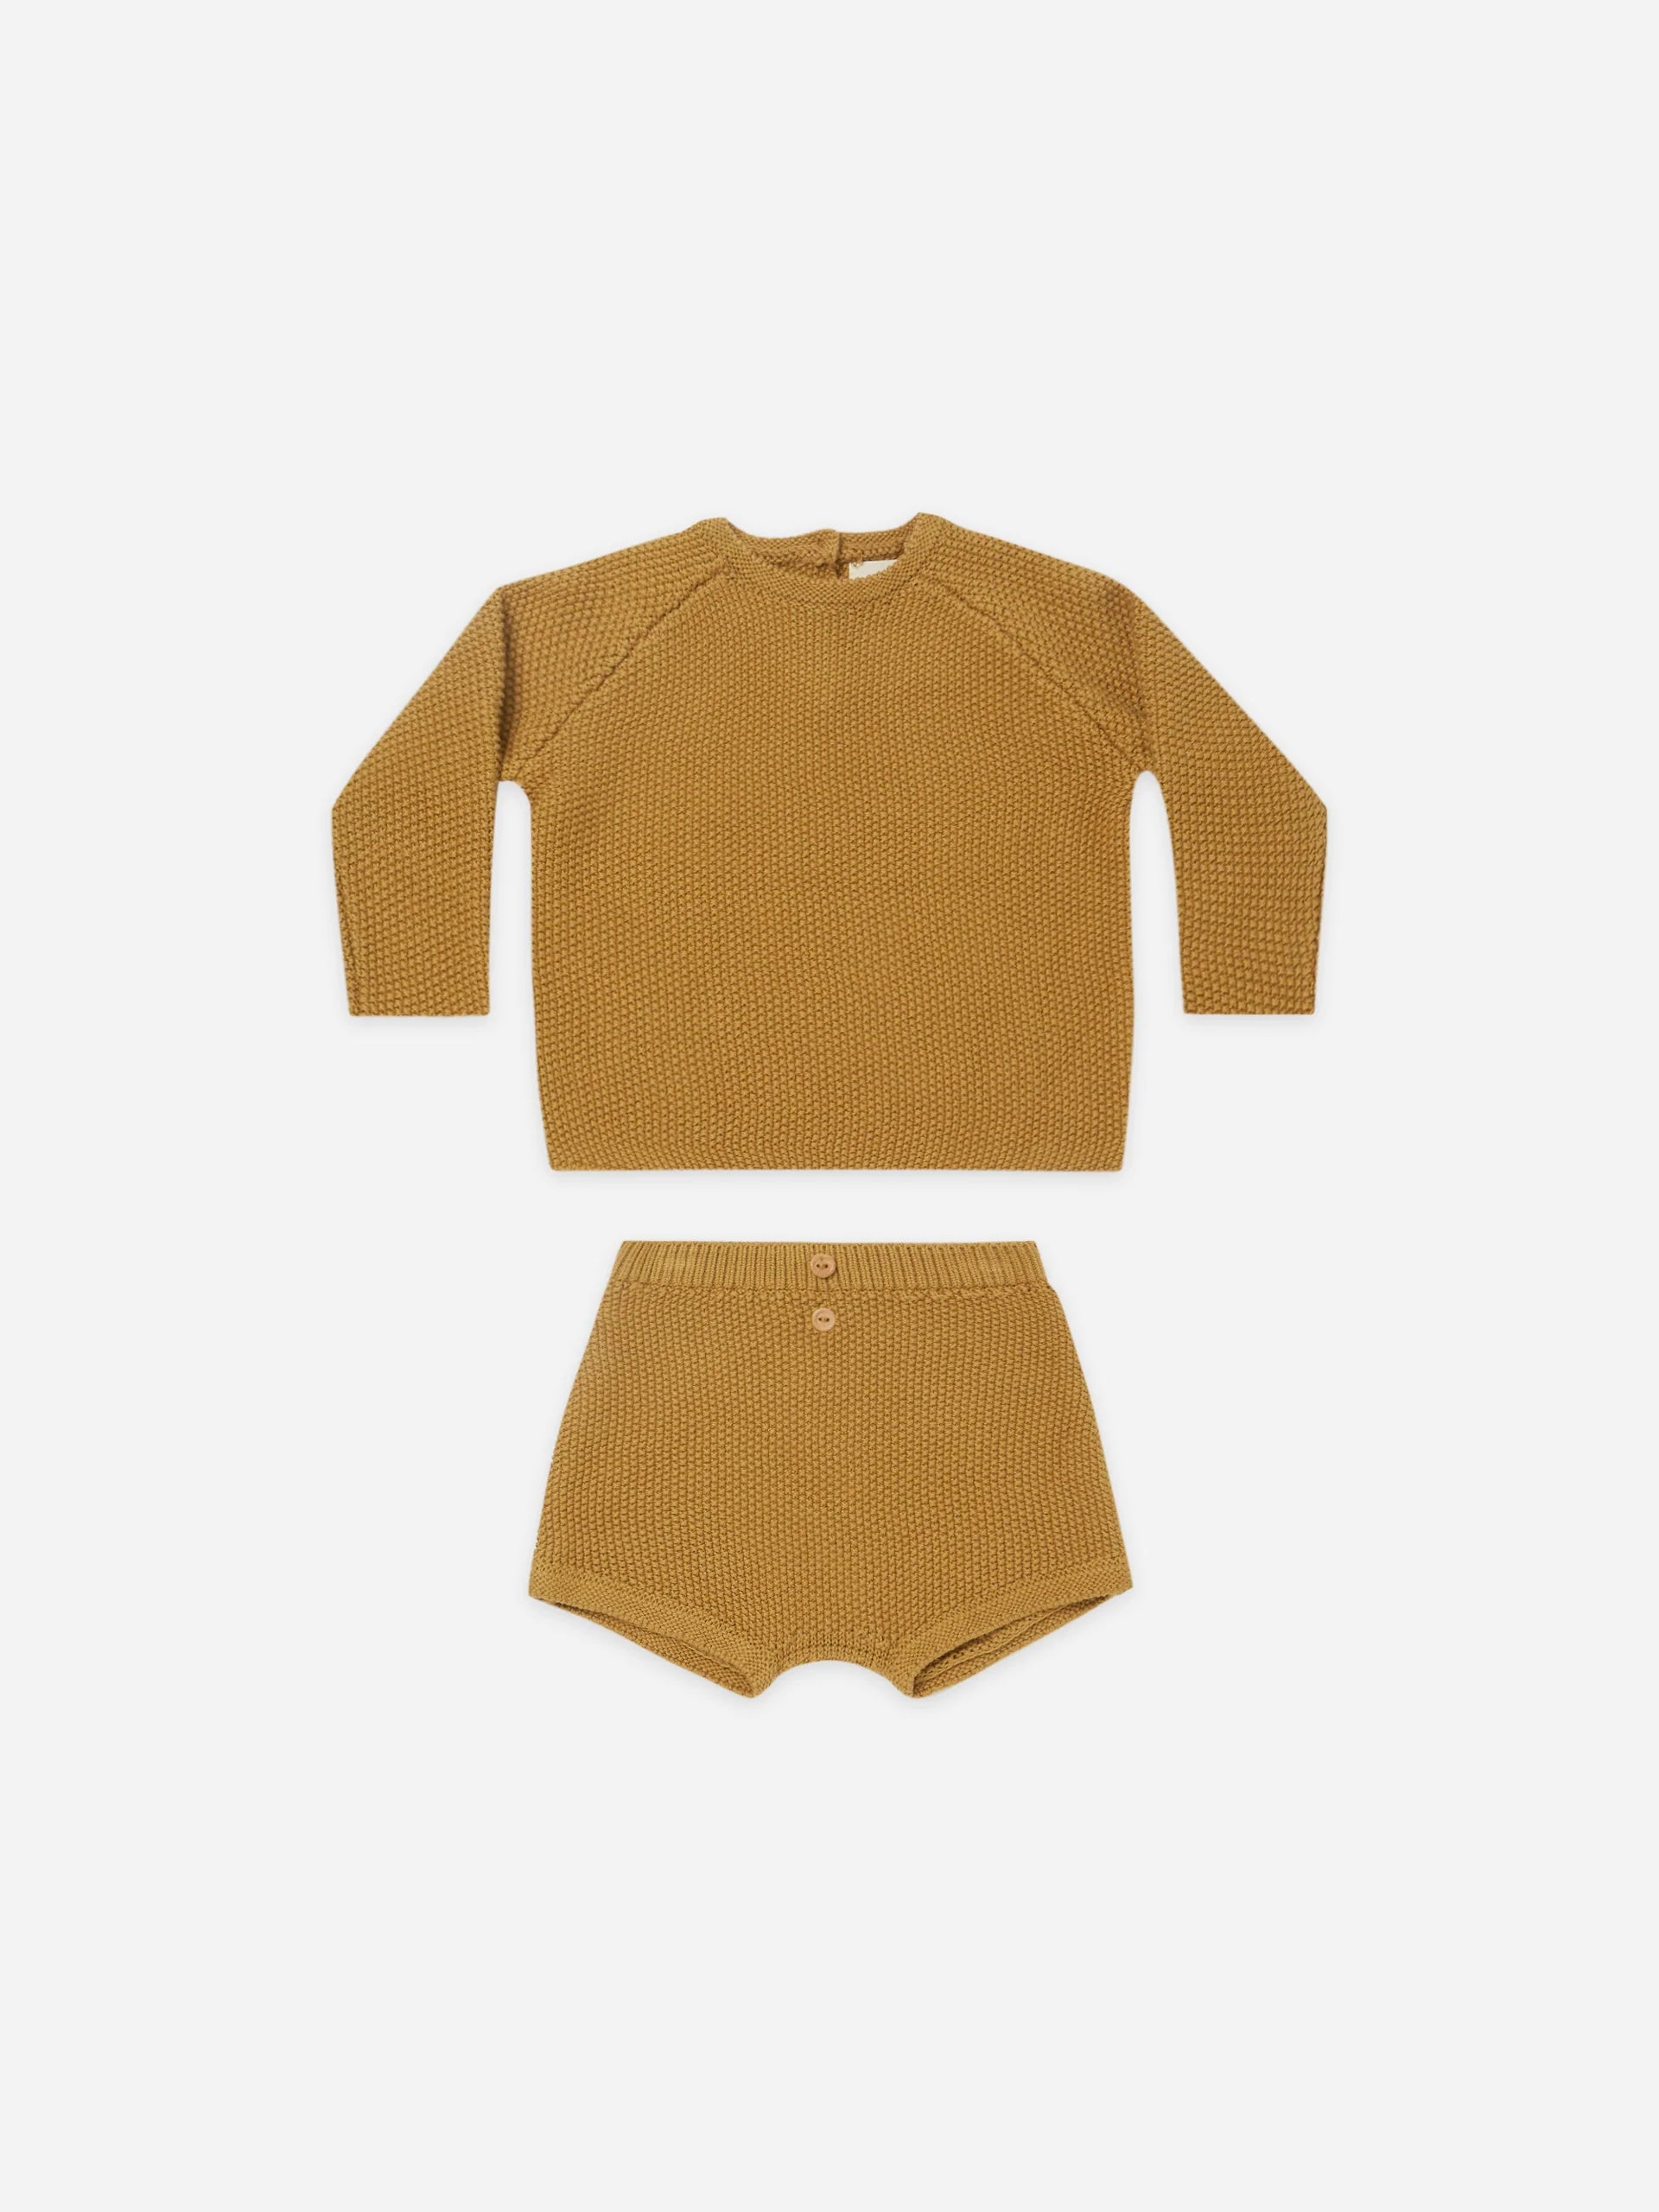 Quincy Mae Summer Knit Set - Ocre